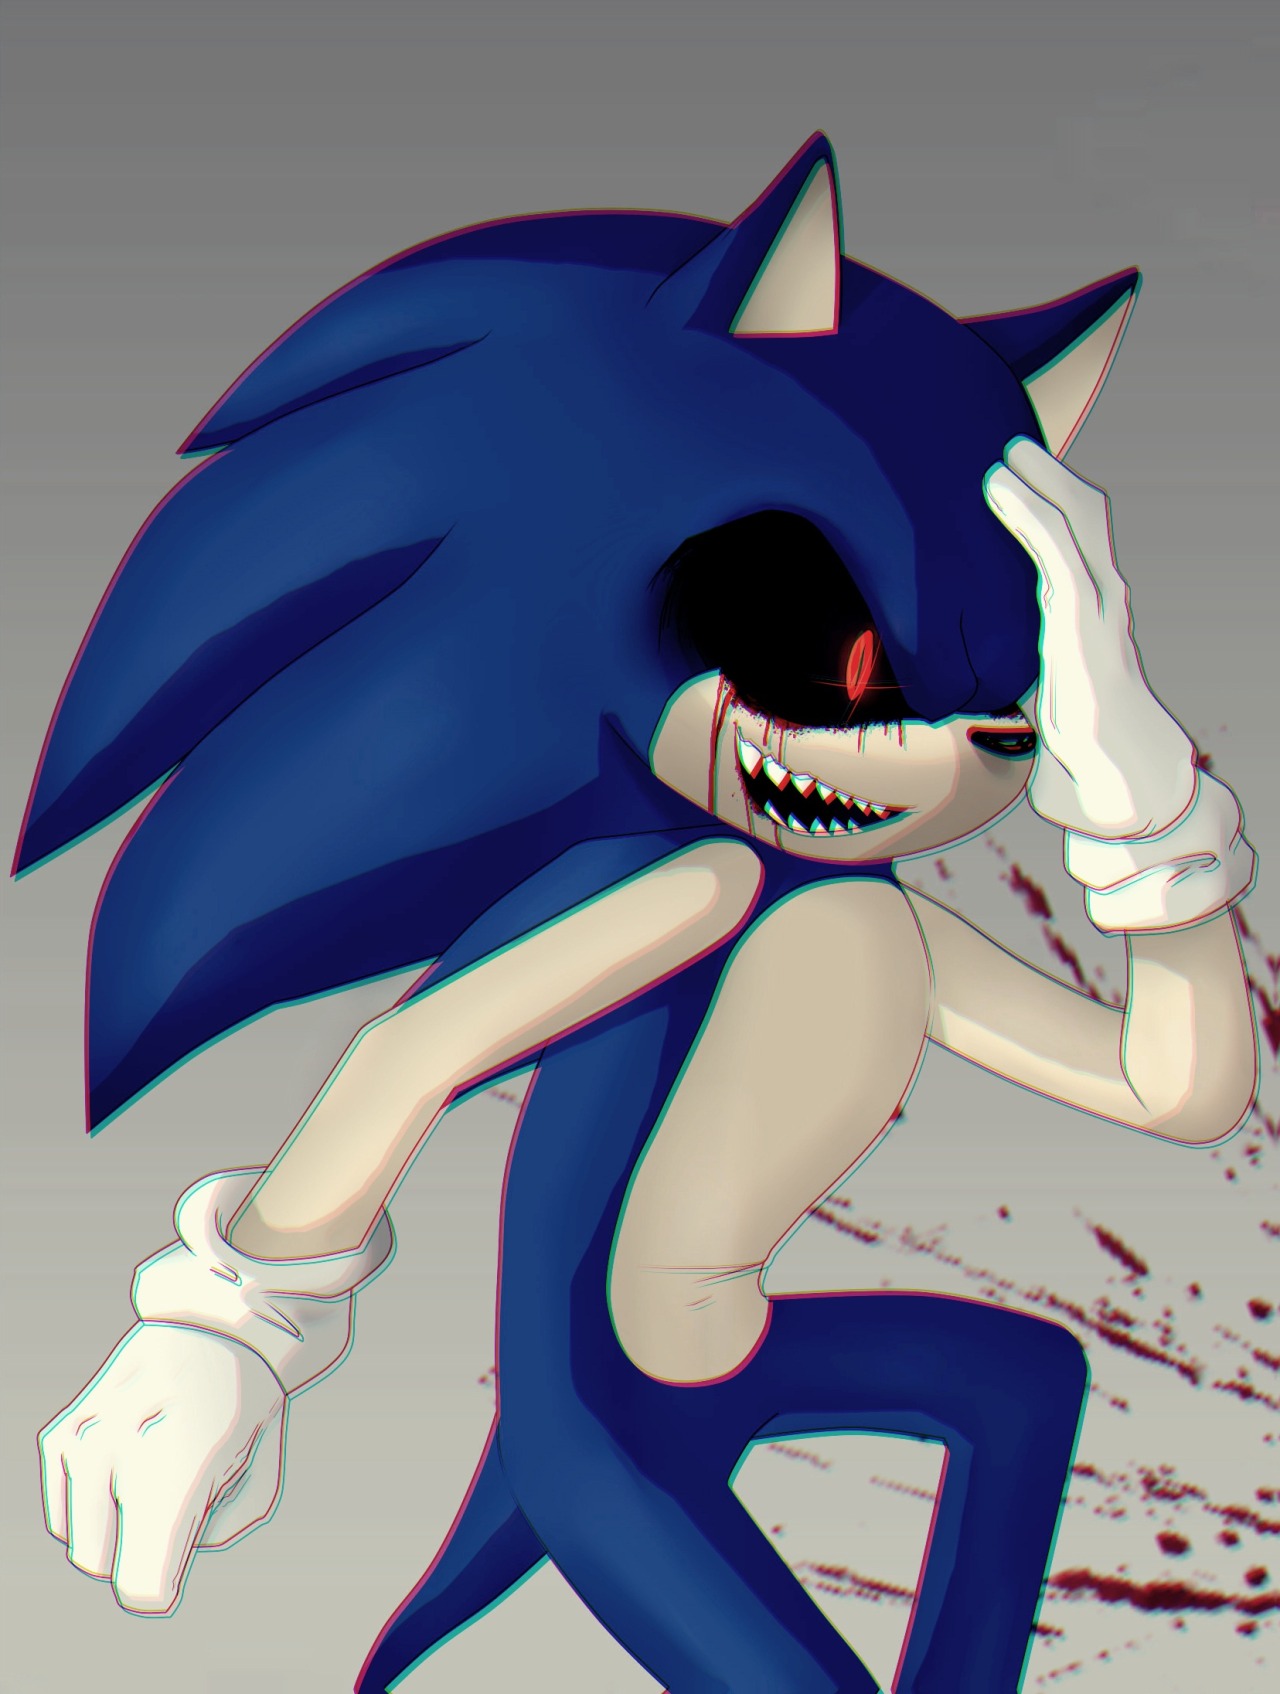 Sonic.exe commission for waxym23 over deviantart! #sonic the hedgehog #Sonic Sega#sonic #sonic.exe #sonic exe#sonicexe#creepypasta#dark sonic#Blood